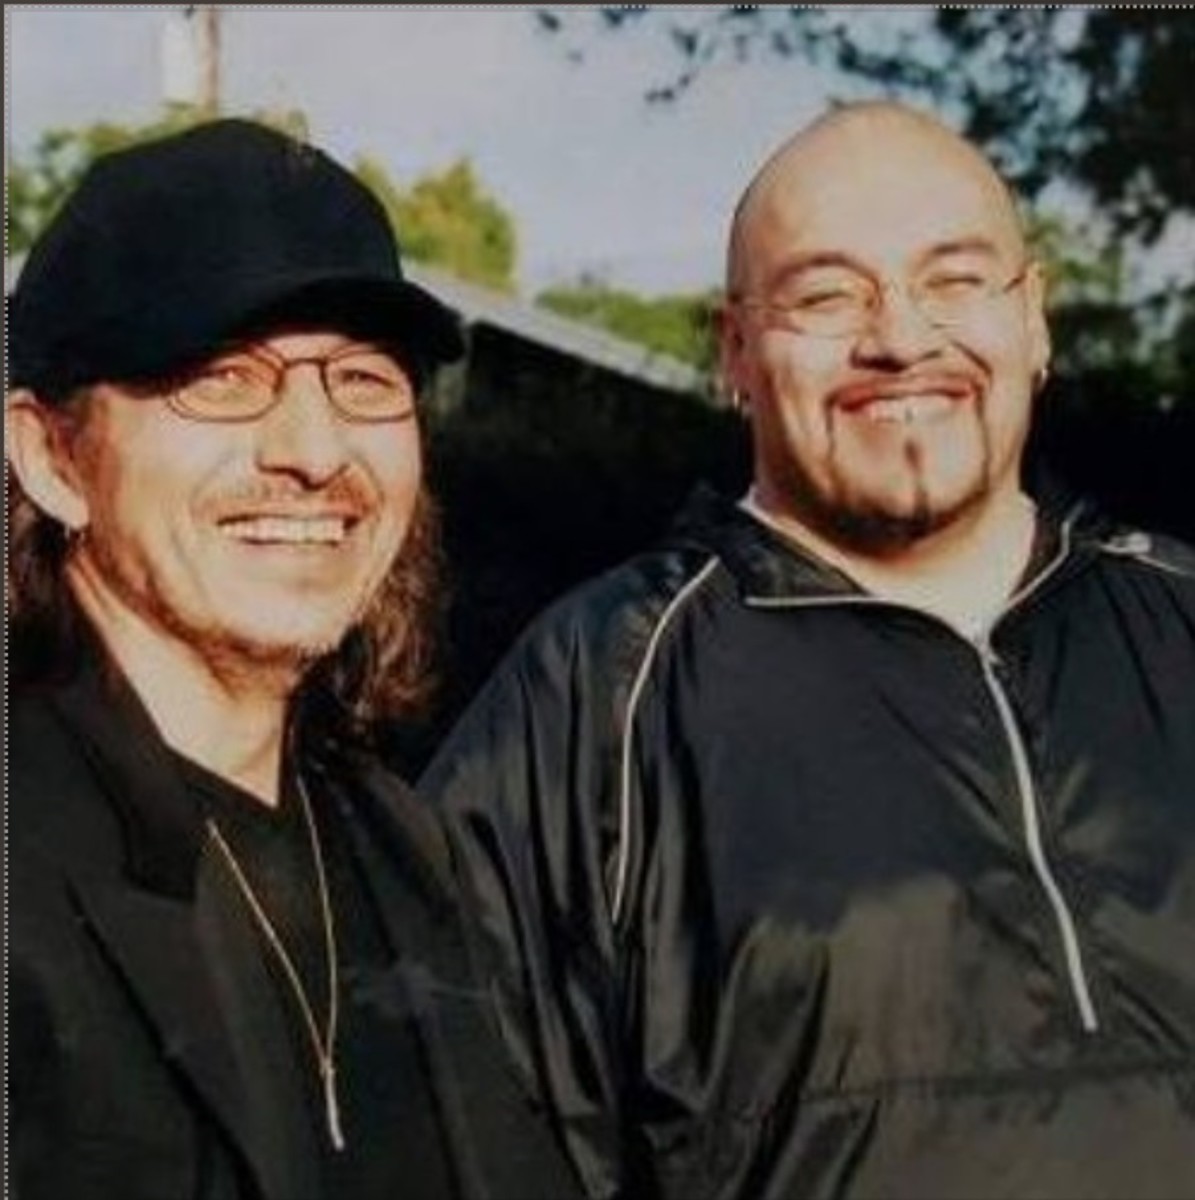 Indigenous artist Wovoka Trudell, Santee Dakota, is shown here with his father, political activist, musician and poet John Trudell, in December 2002. John Trudell, who was spokesman for the occupation of Alcatraz starting in 1969 and later became a leader in the American Indian Movement, died on Dec. 8, 2015 at age 69. (Photo courtesy of Wovoka Trudell)